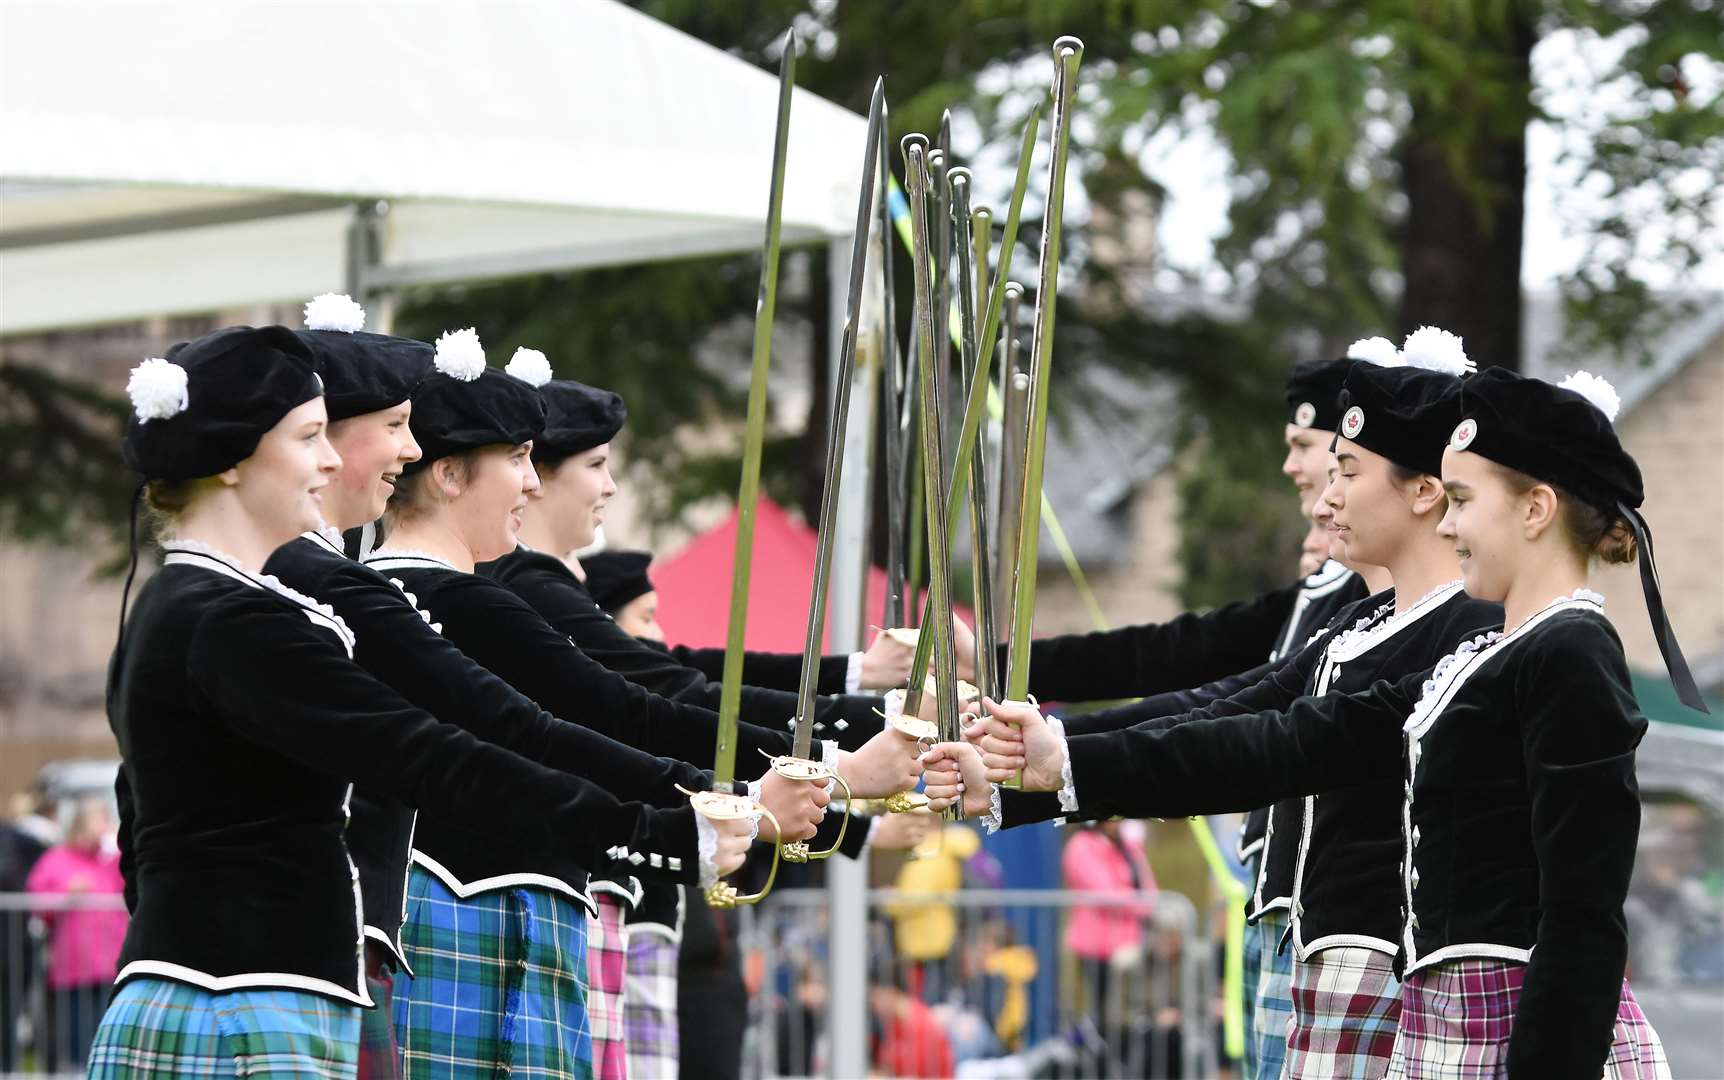 The Dunvegan Dance Academy from Vancouver, Canada...Forres Highland Games 2019...Picture: Becky Saunderson. Image No.044383.